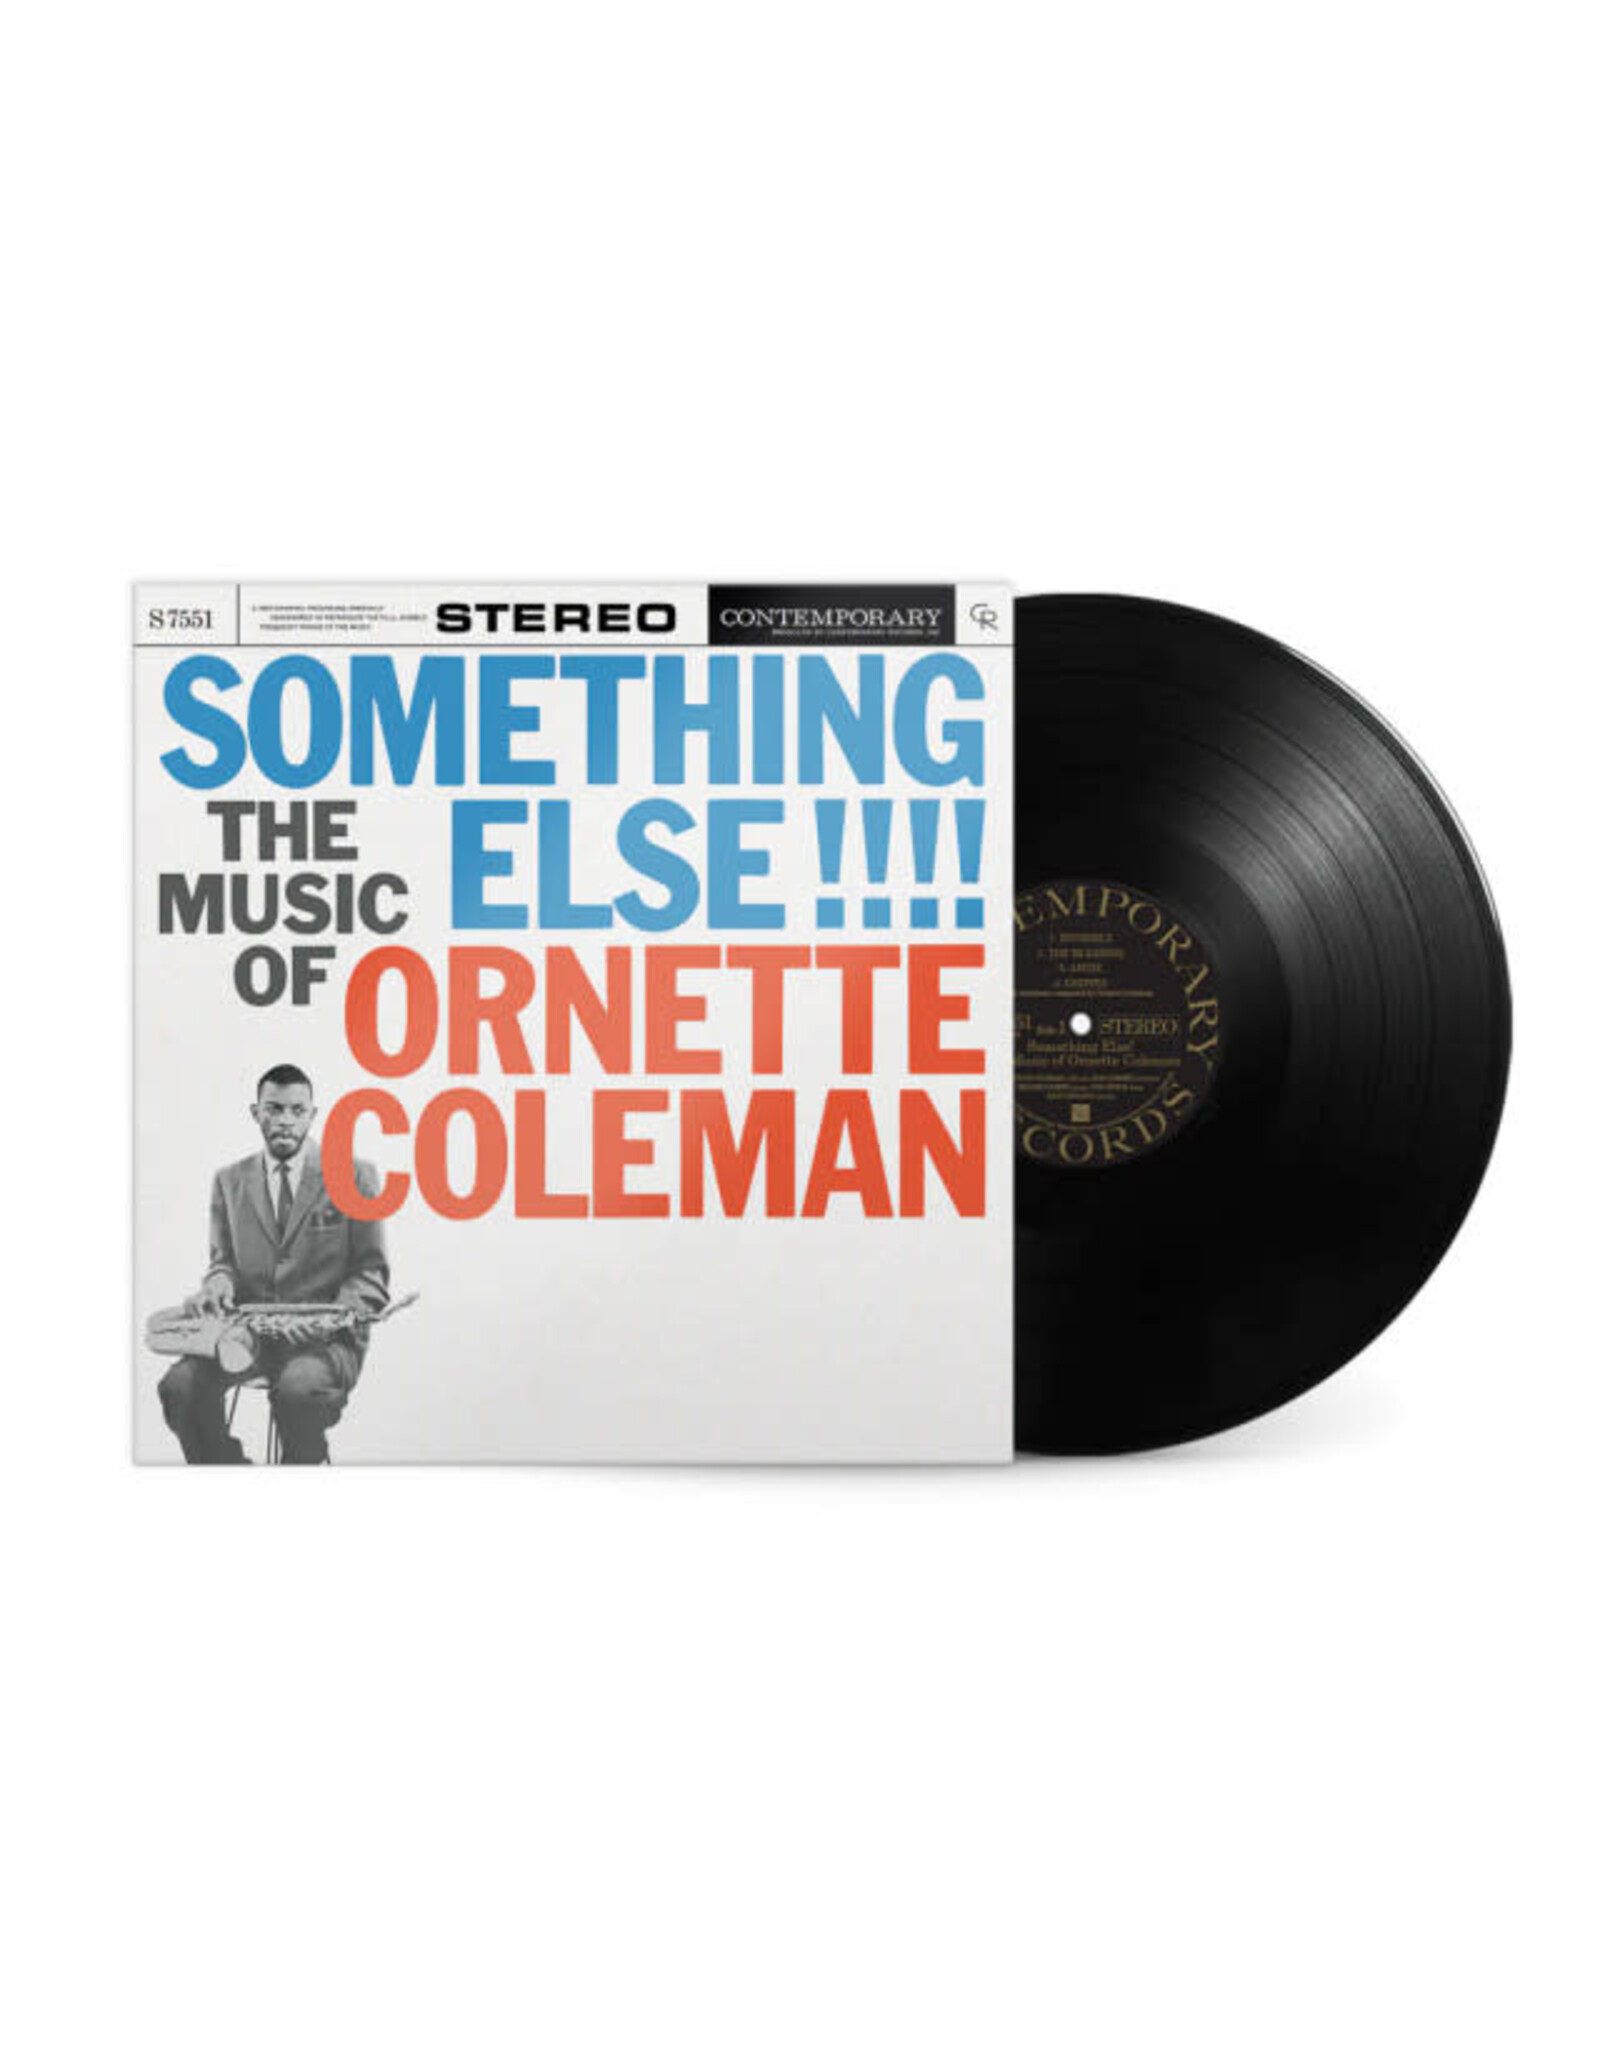 Craft Coleman, Ornette: Something Else!!!! (Contemporary Records Acoustic Sounds series) LP